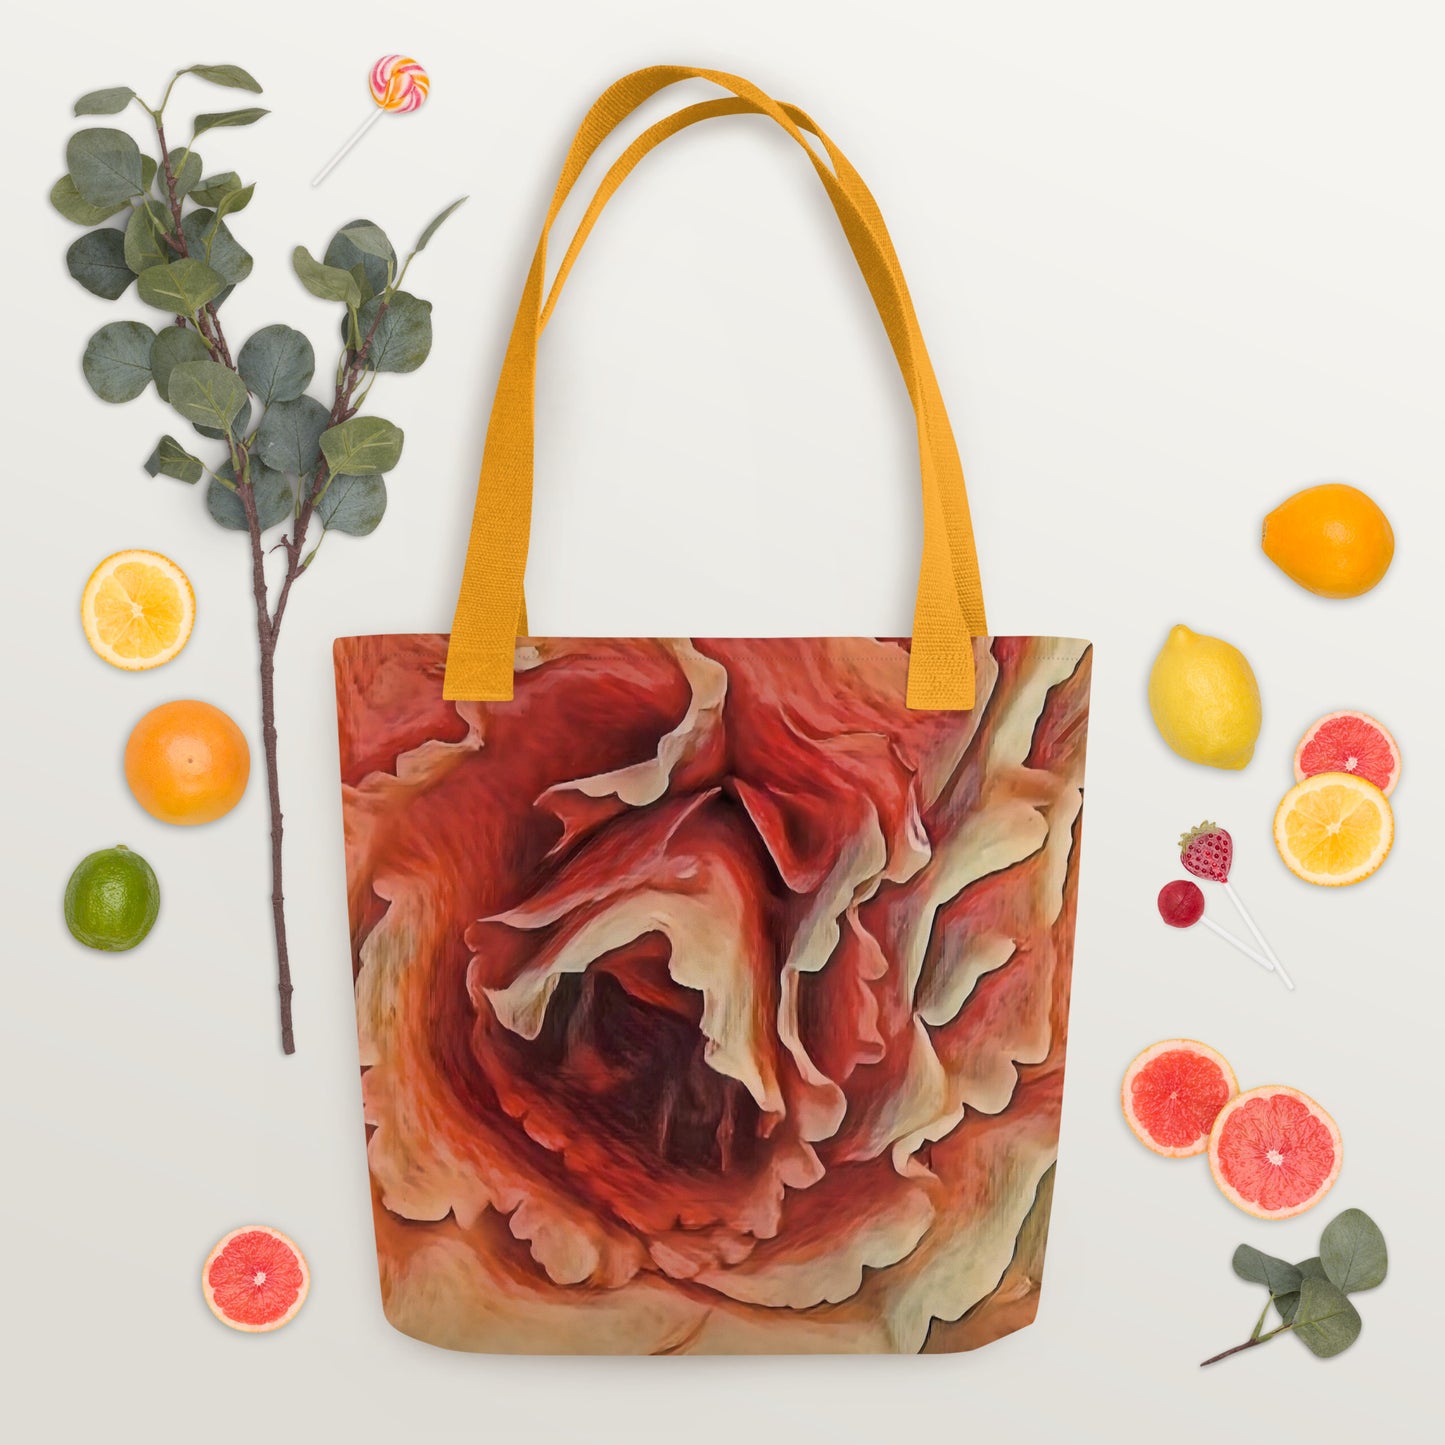 Apricot Begonia Flower Tote